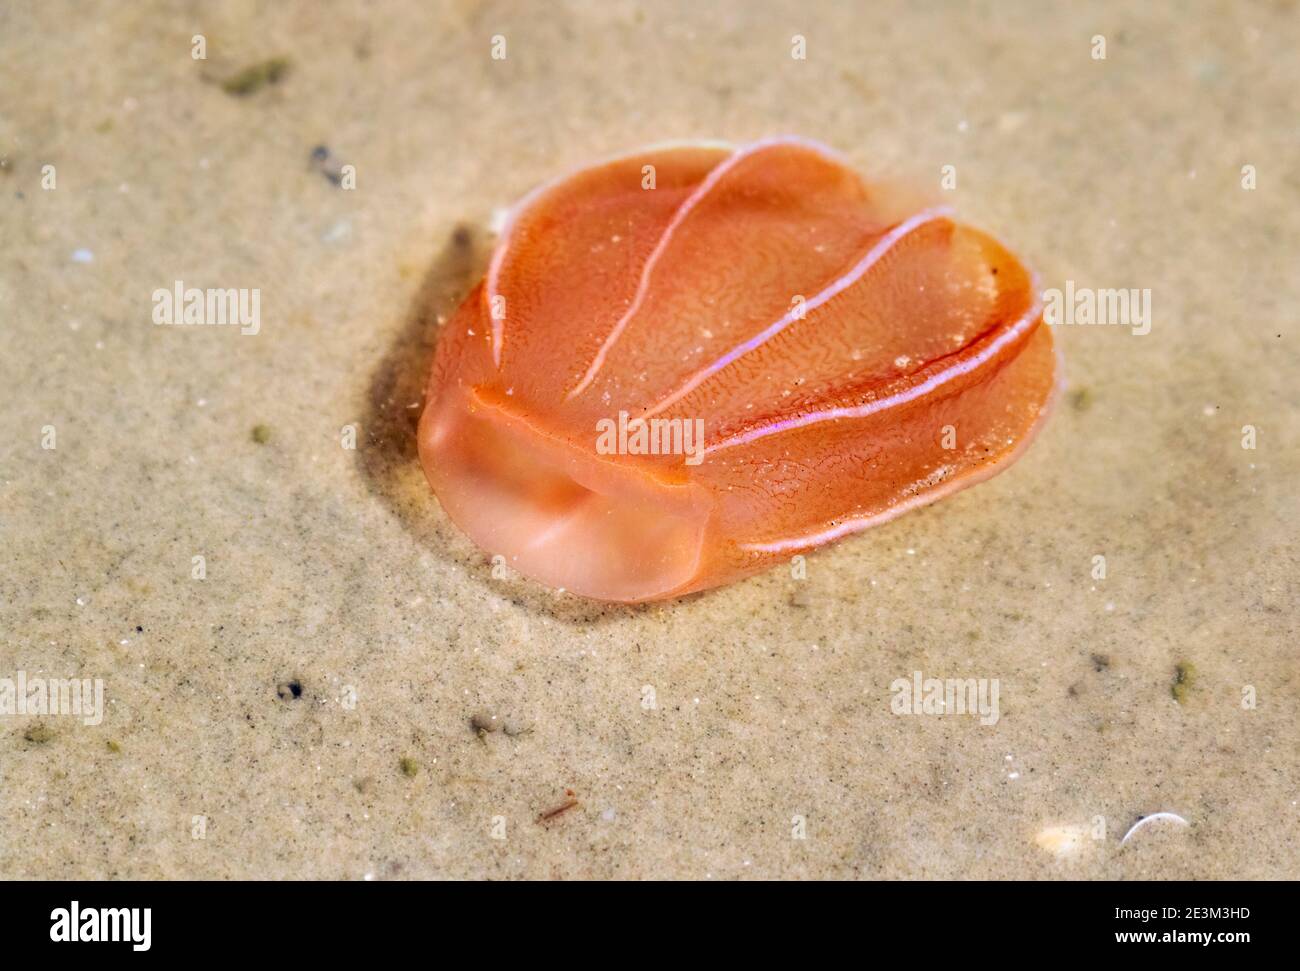 The comb jelly (Beroe cucumis) found in shallow water of Galveston Bay, Texas, USA Stock Photo